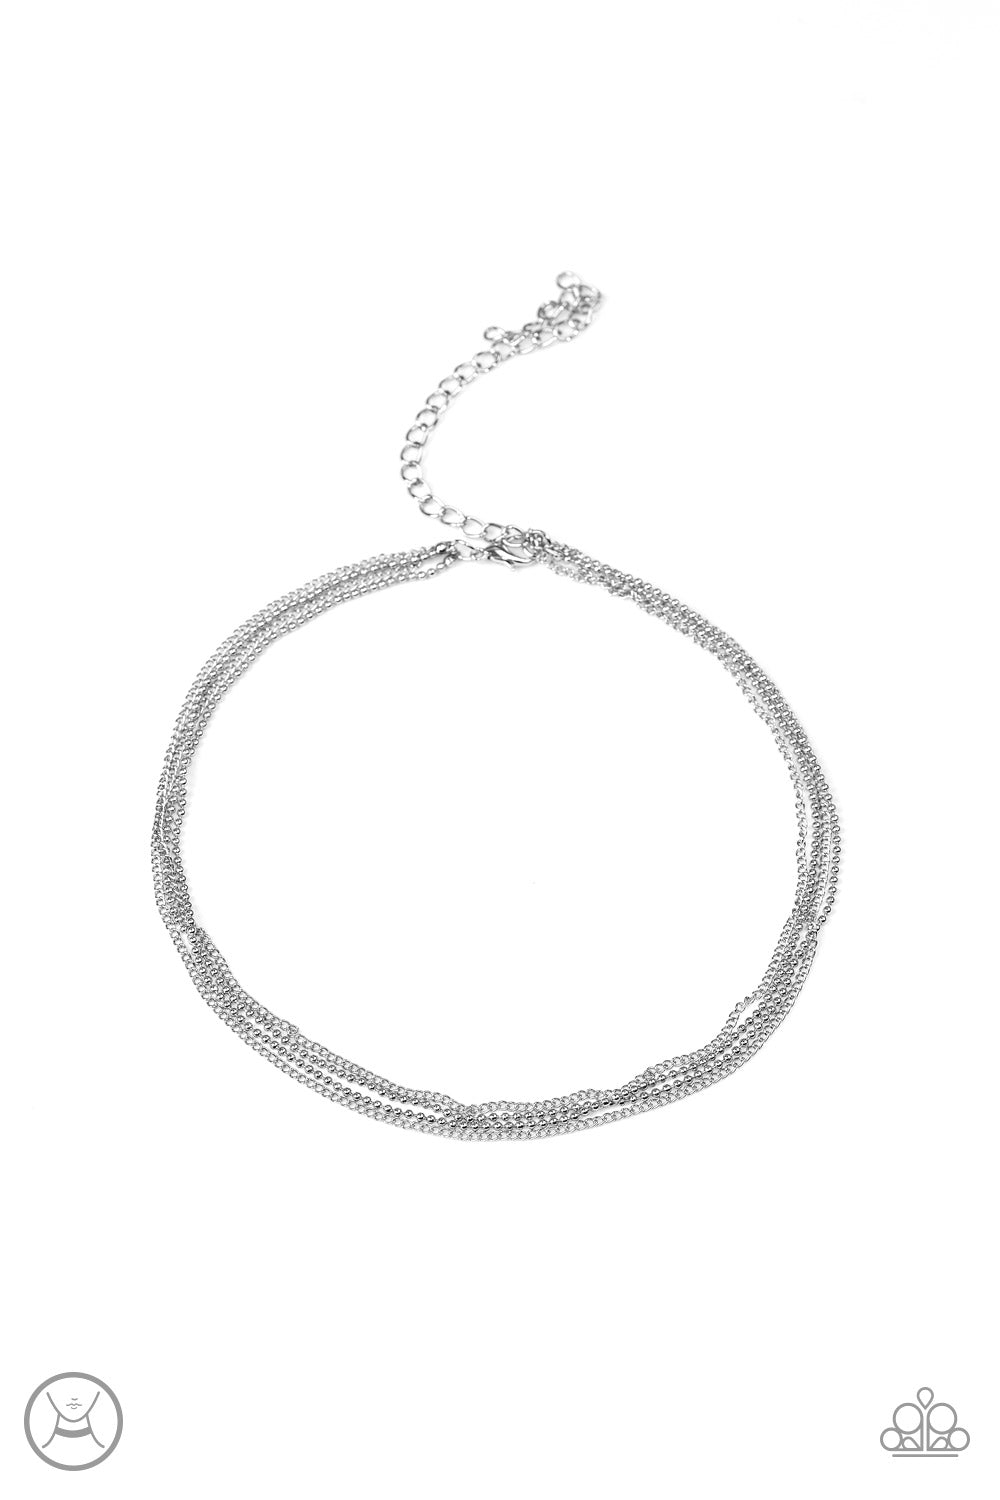 If You Dare - Silver Necklace